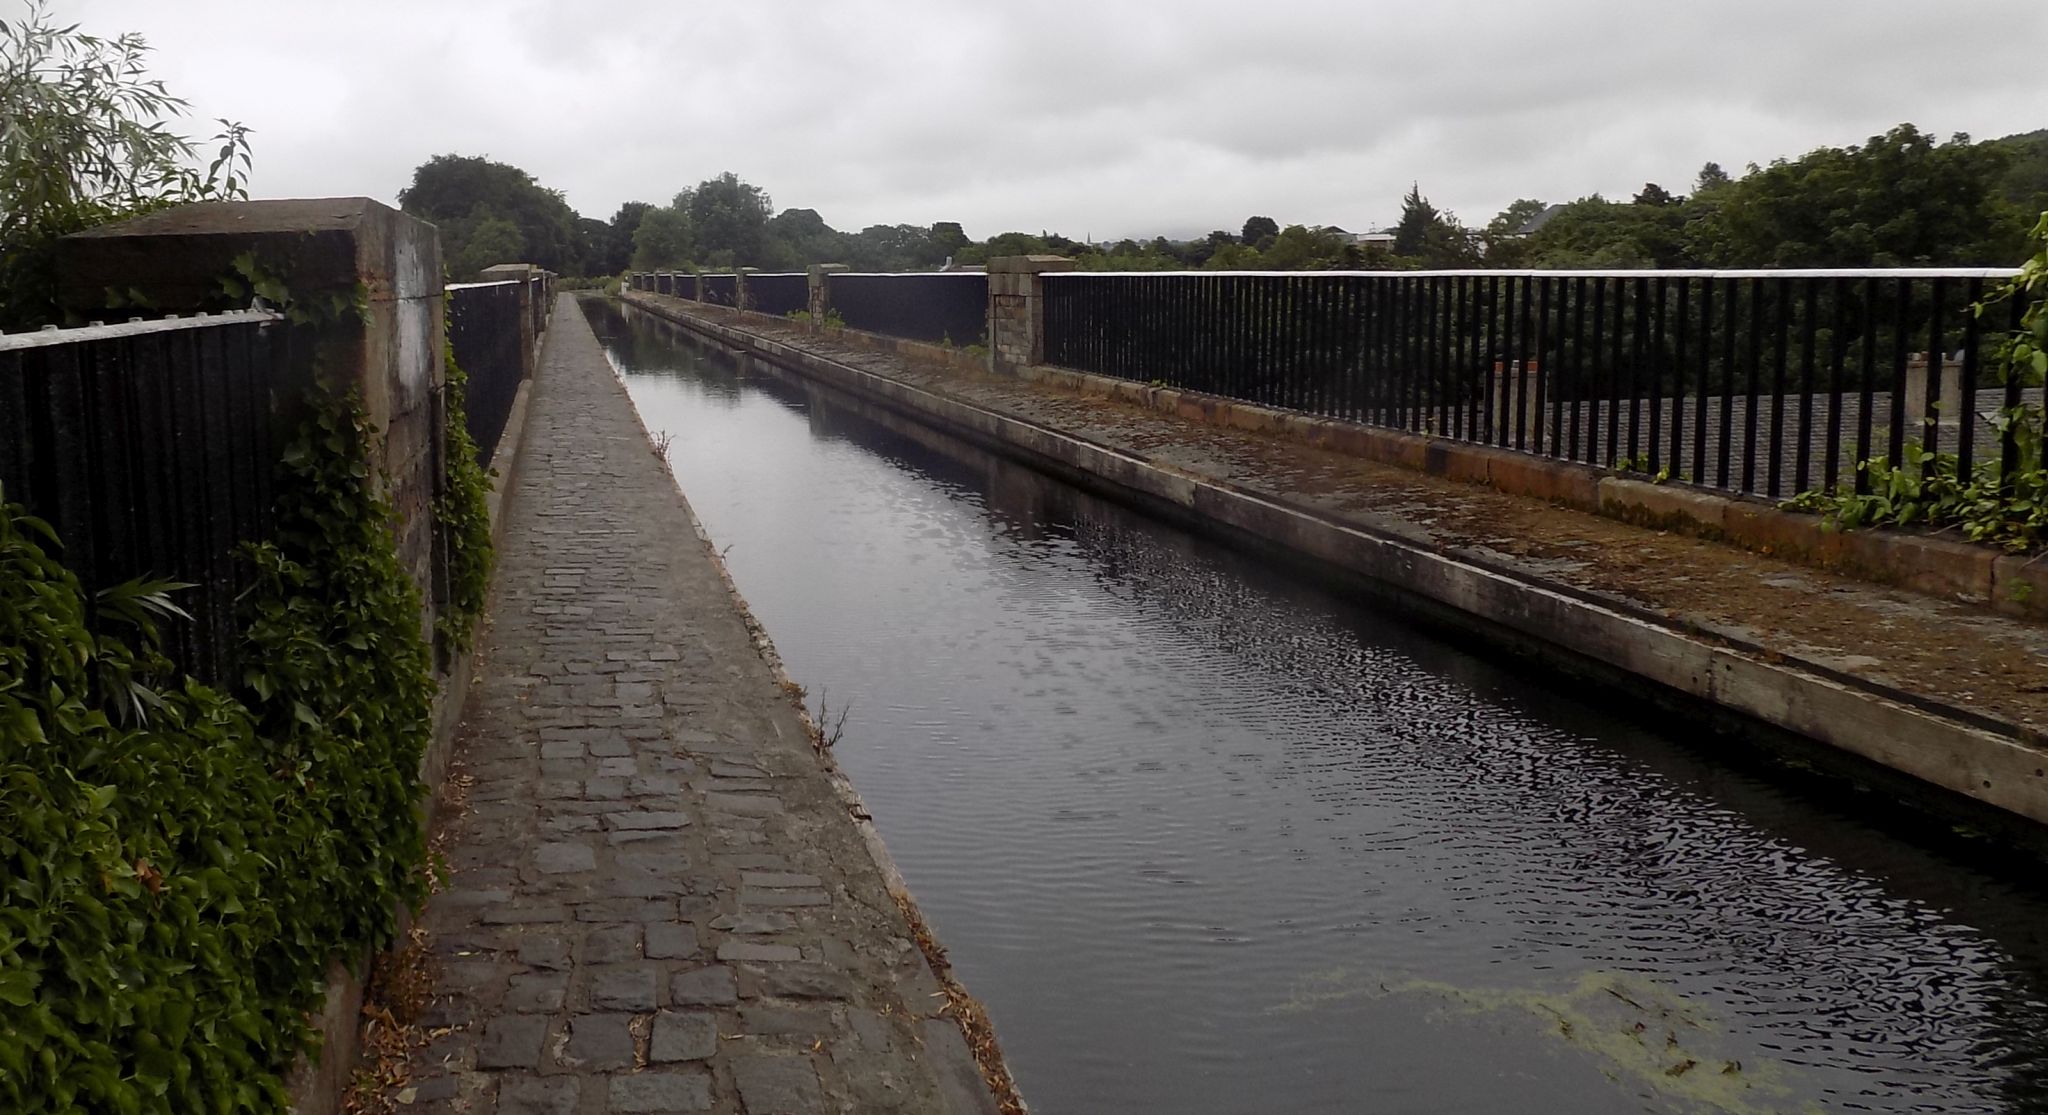 The Slateford Aqueduct over the Water of Leith on the Union Canal